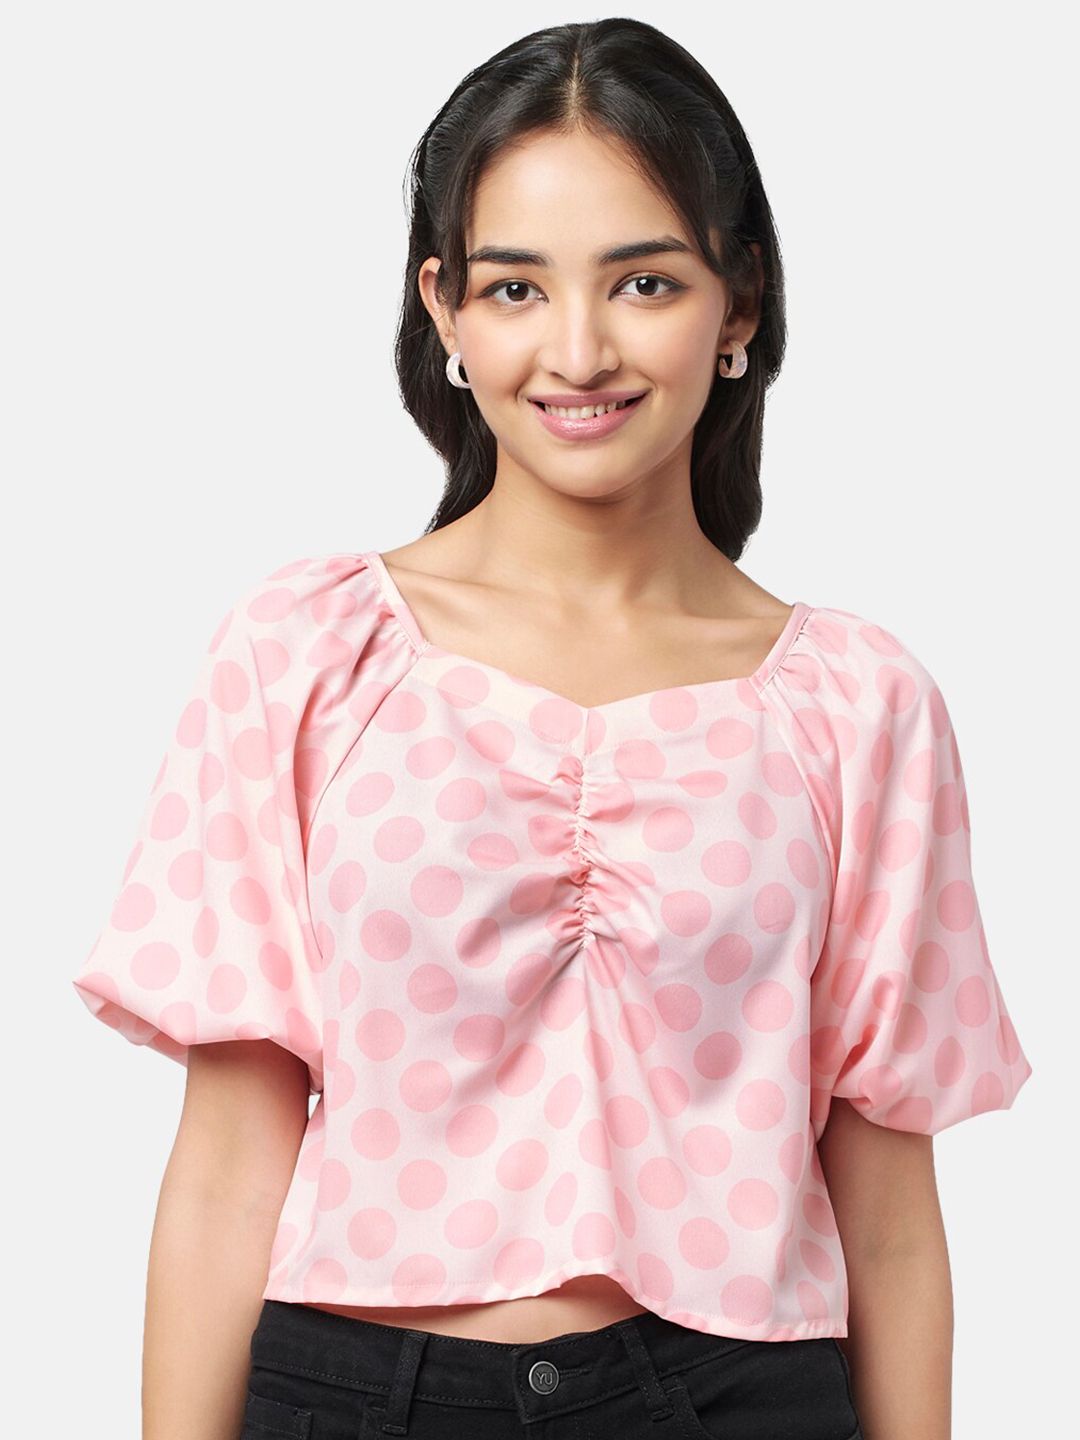 YU by Pantaloons Polka Dots Printed Puff Sleeves Ruched Top Price in India